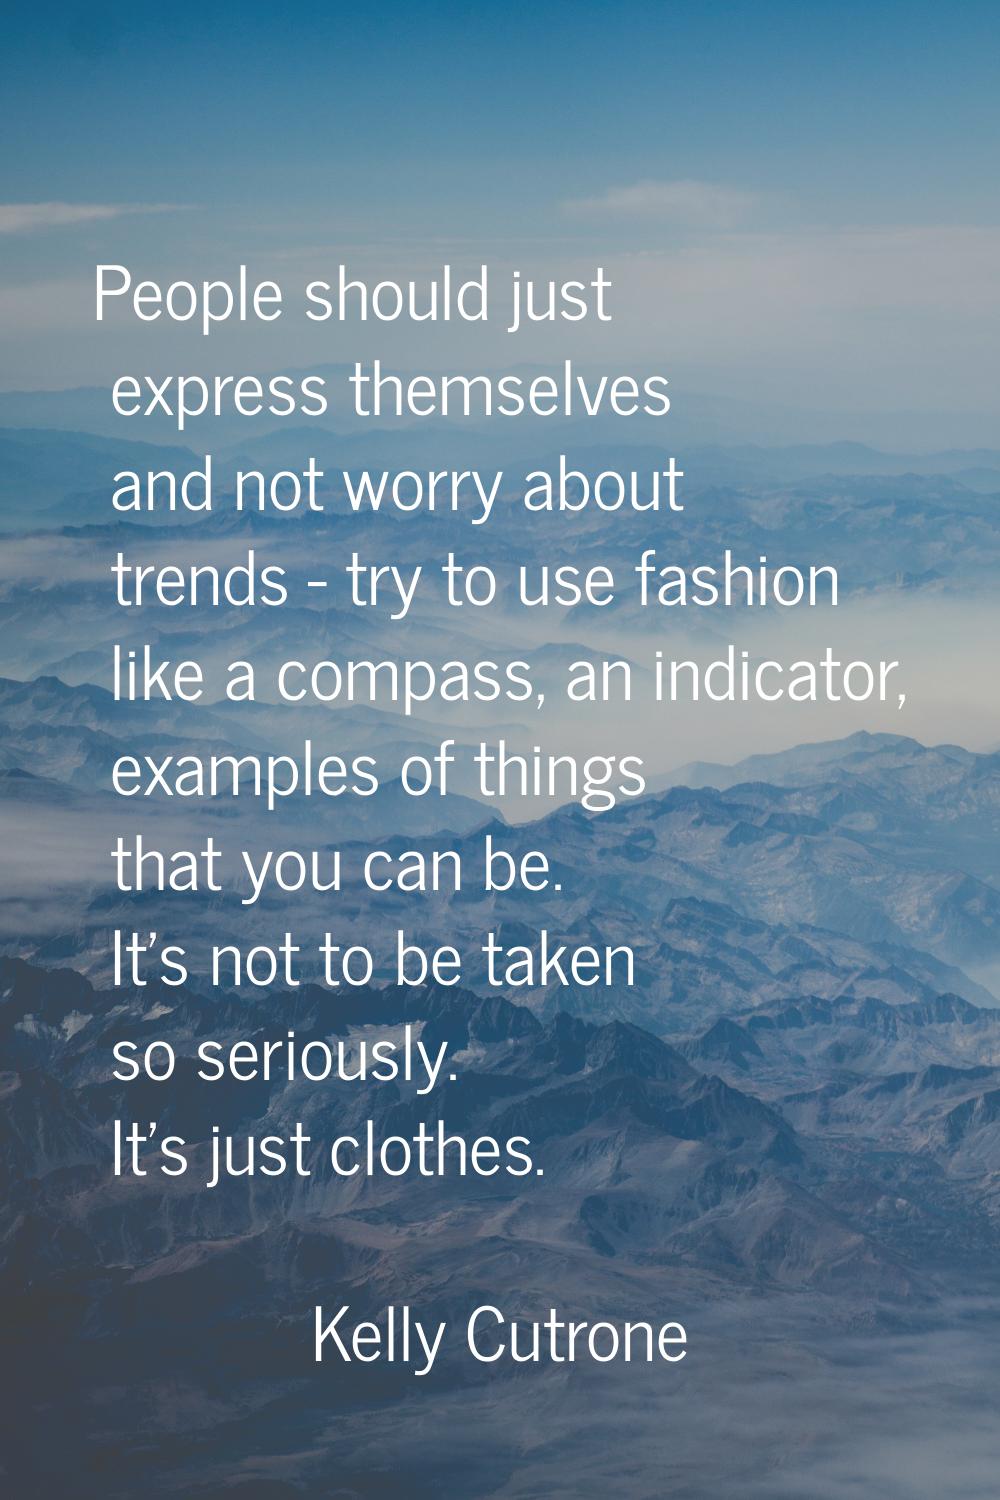 People should just express themselves and not worry about trends - try to use fashion like a compas